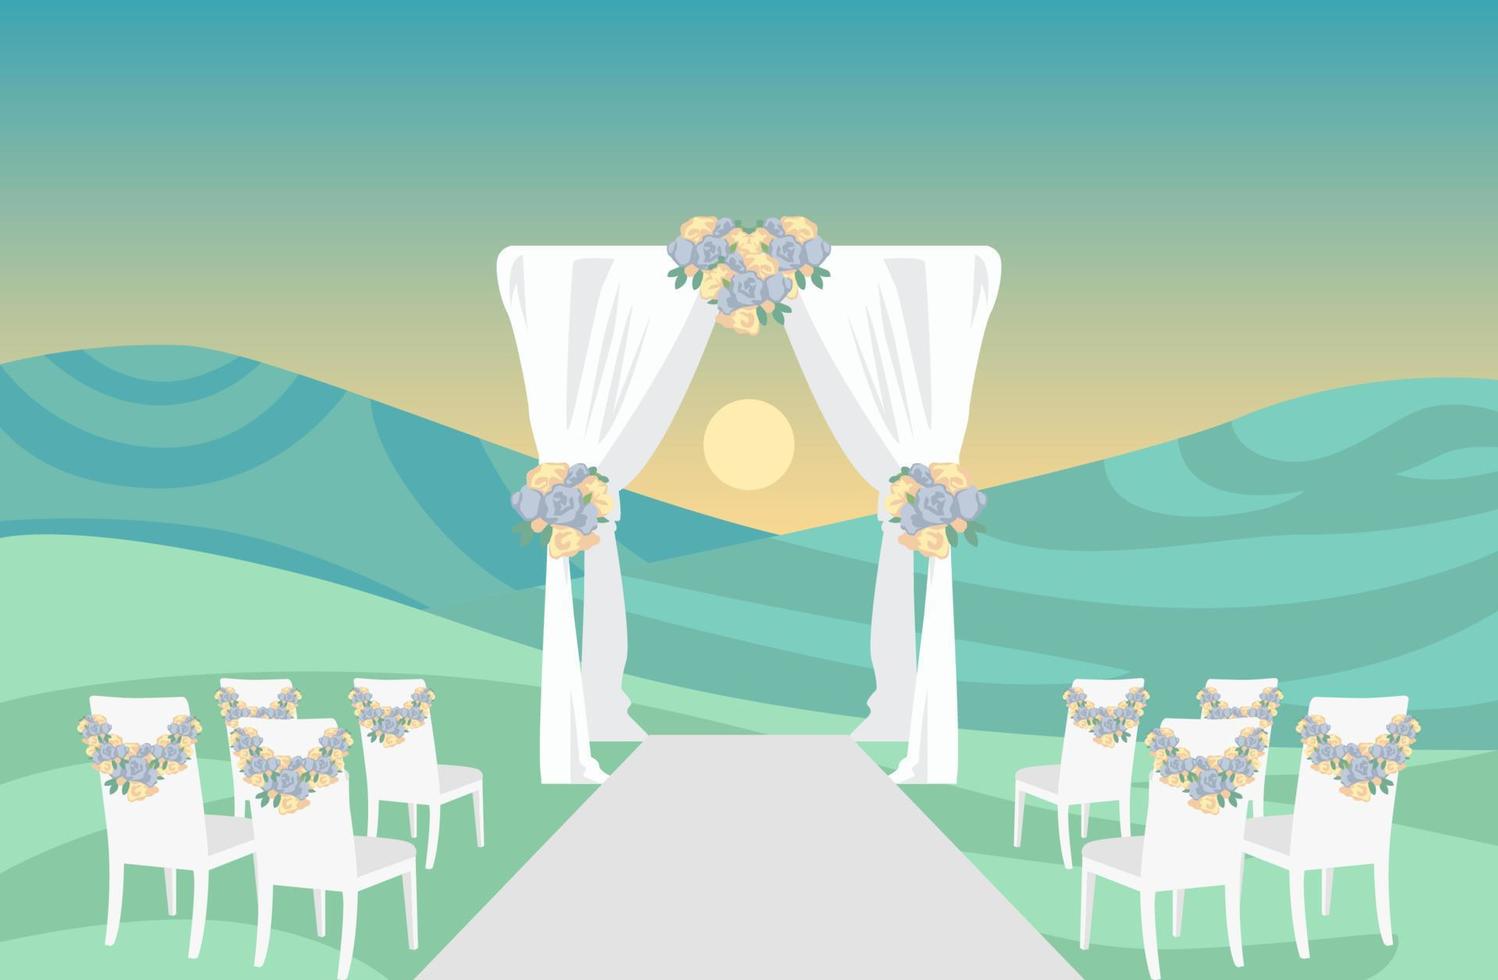 Colorful hill garden wedding arch decorations vector illustration